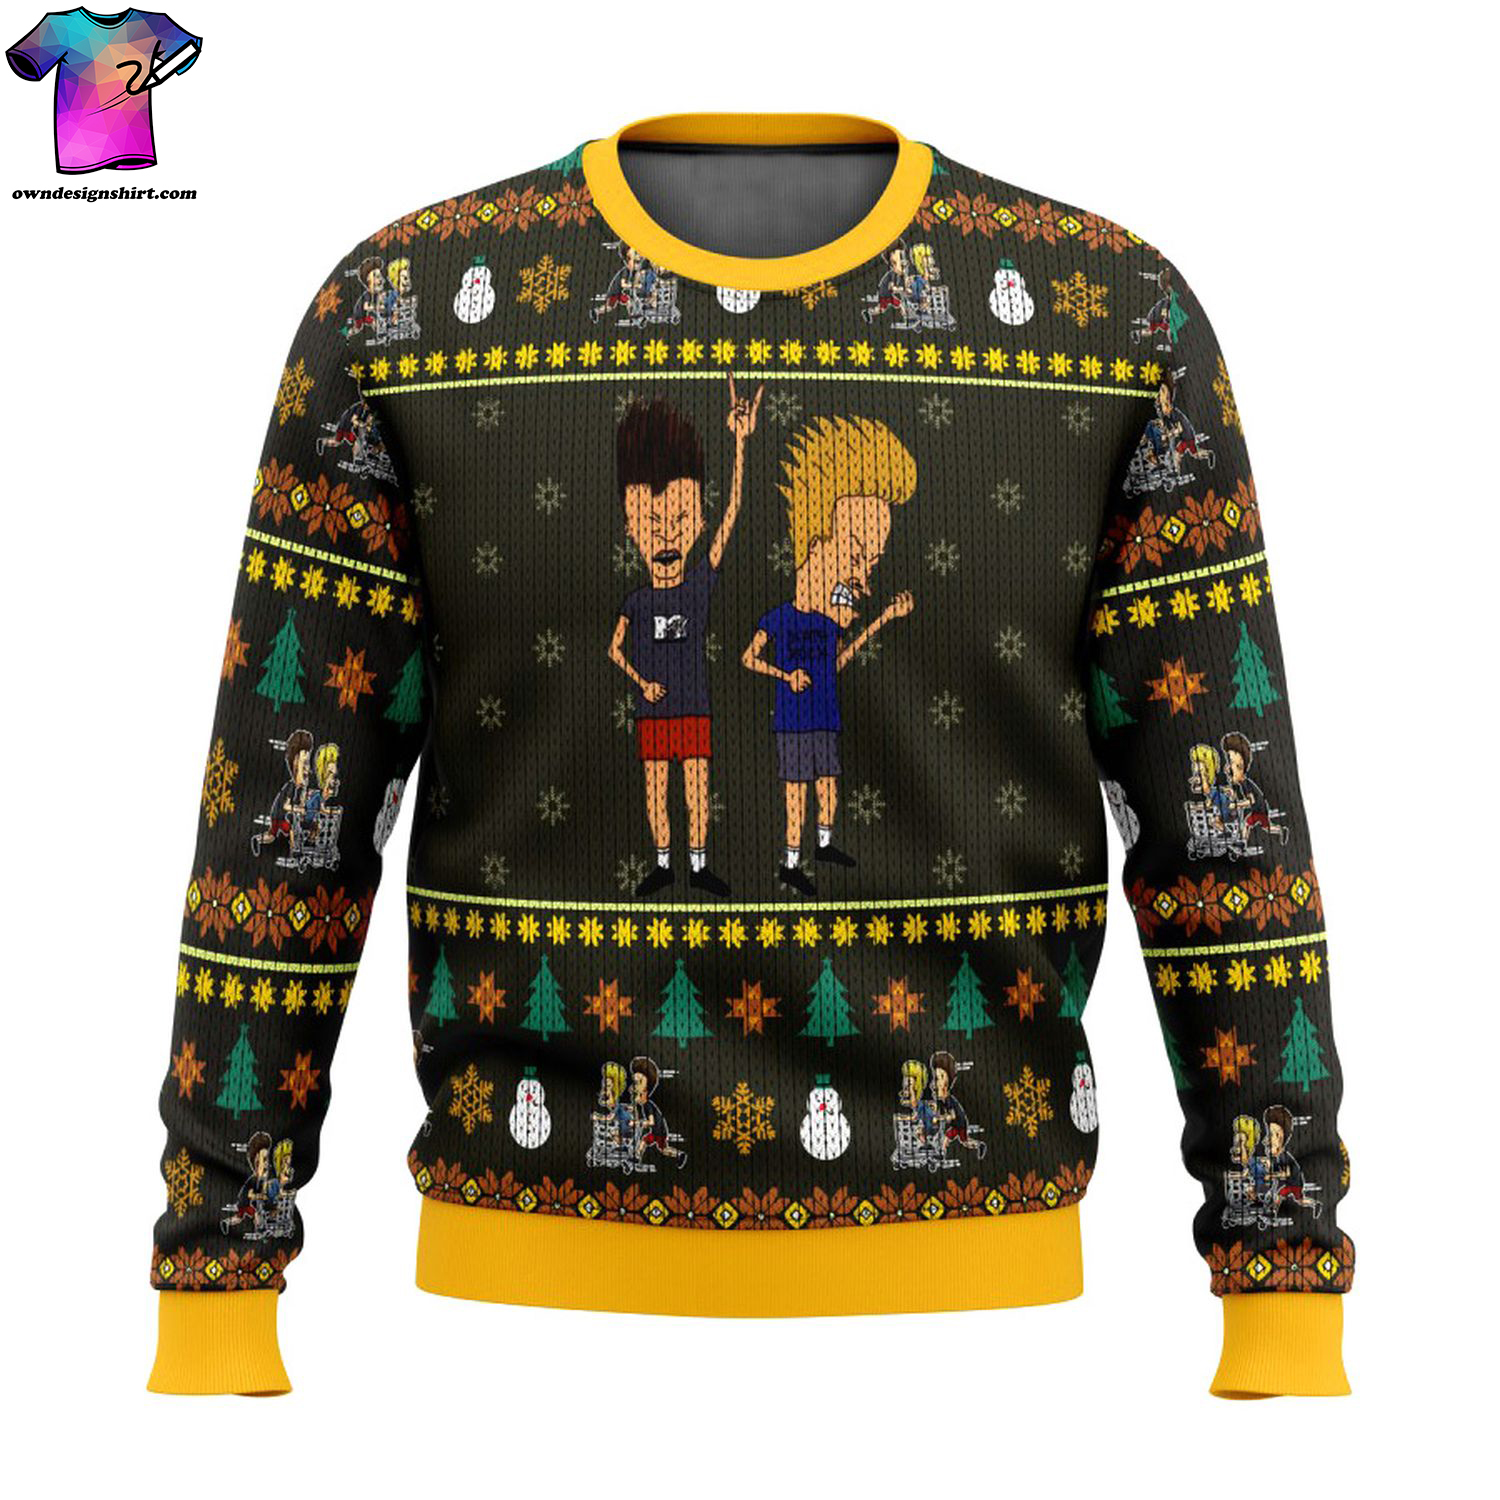 TV show beavis and butt-head ugly christmas sweater